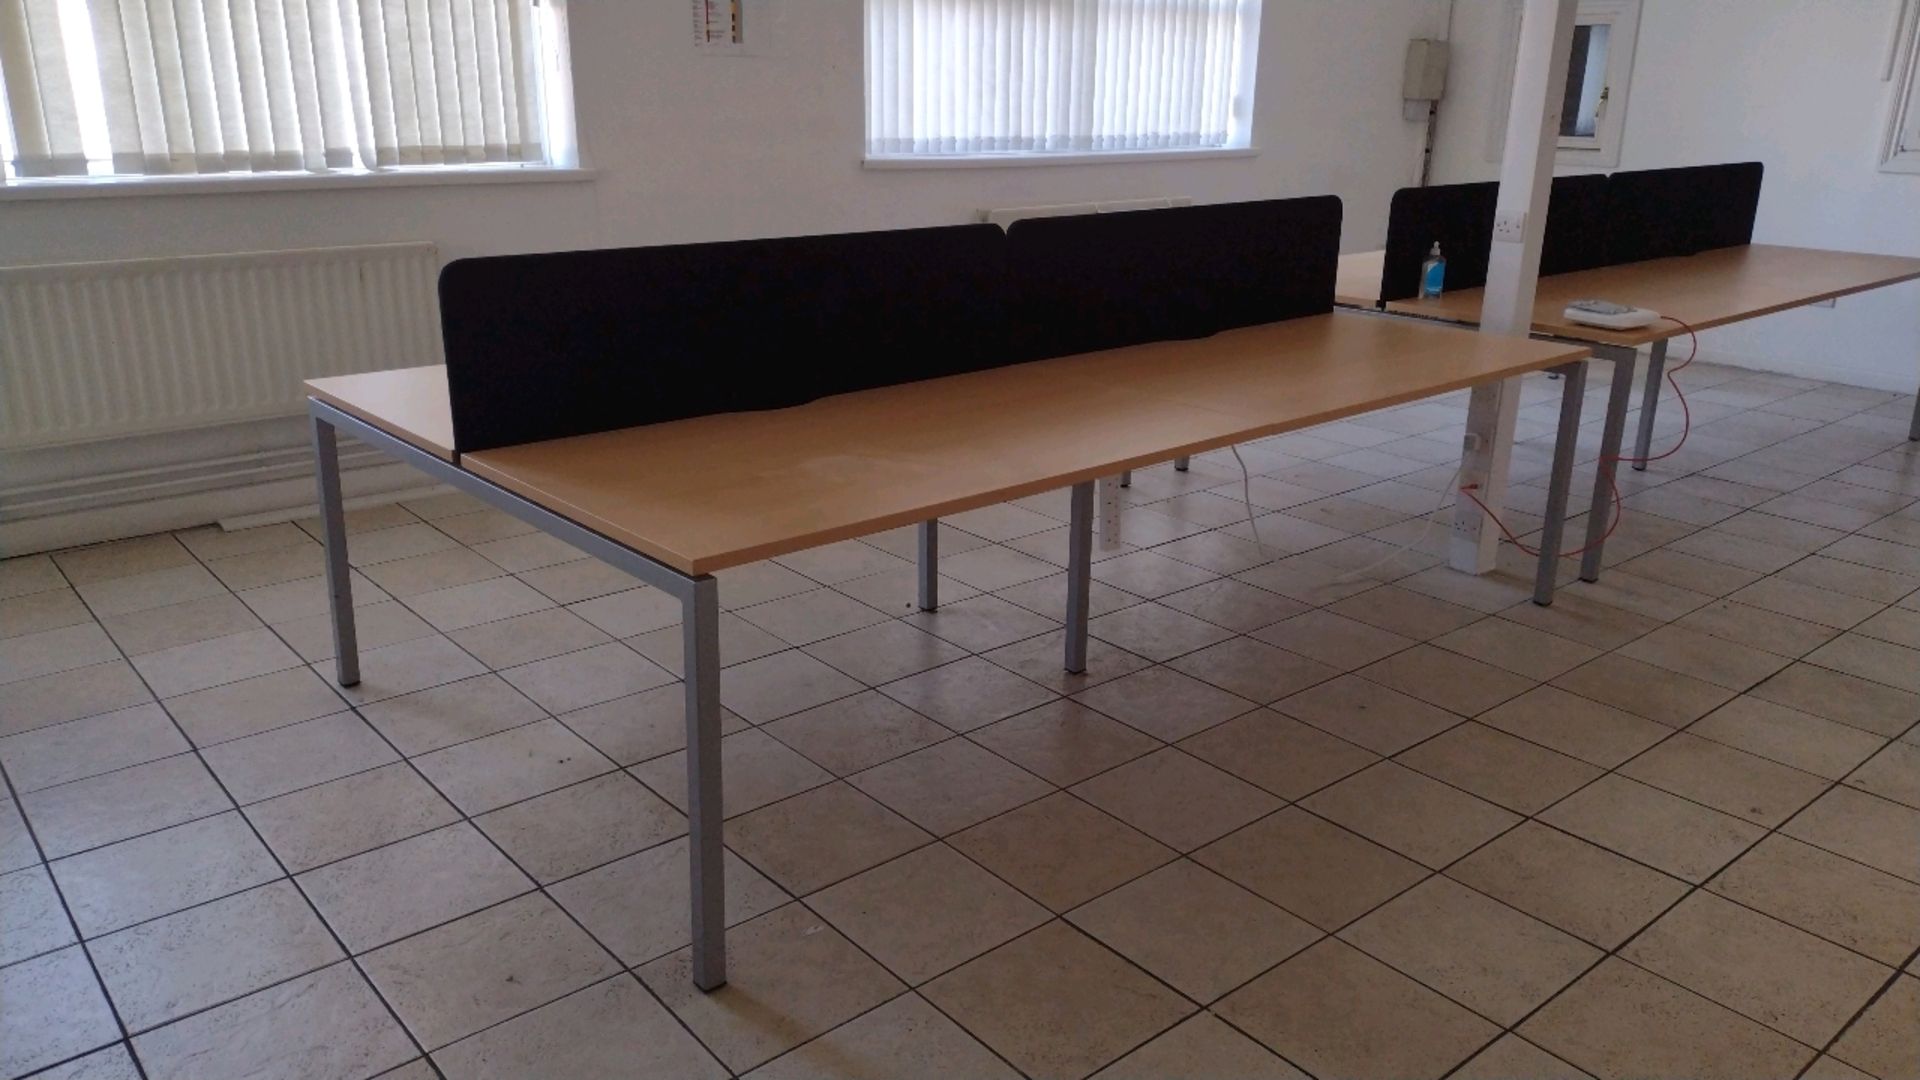 4x Office Desk With Central Divide